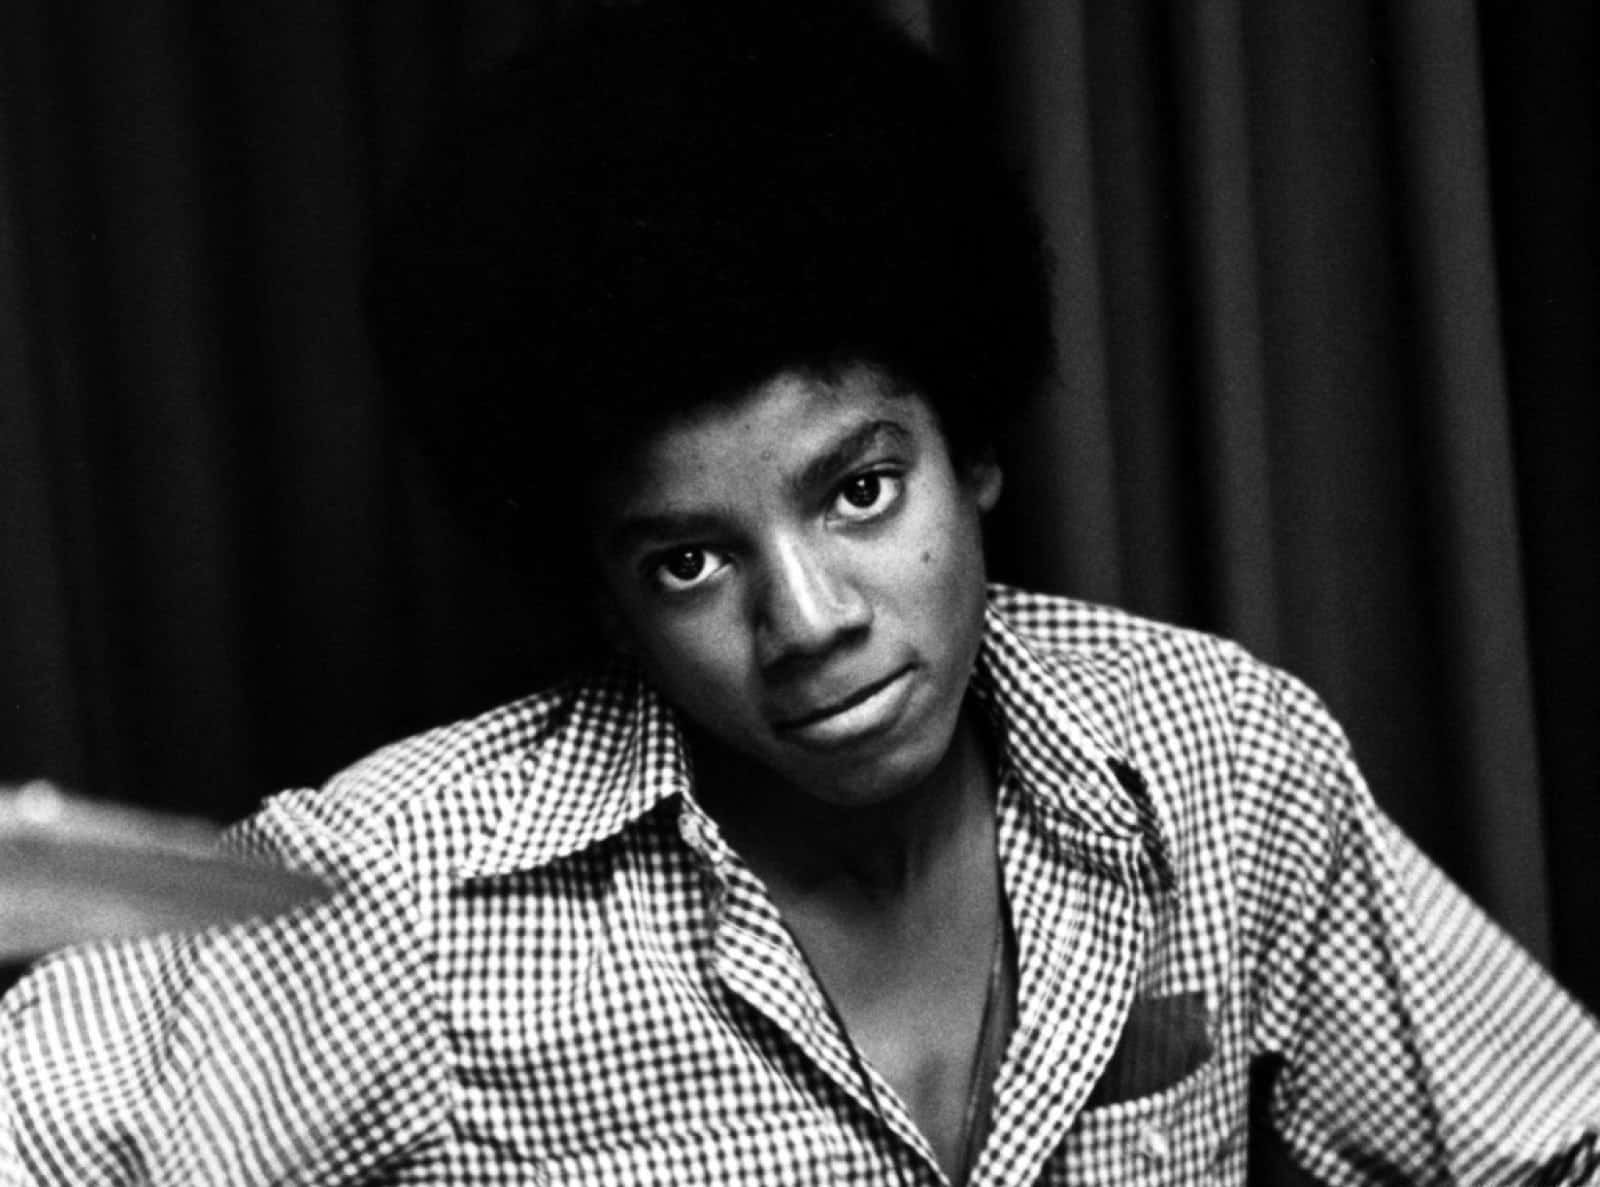 michael jackson when he was black and young